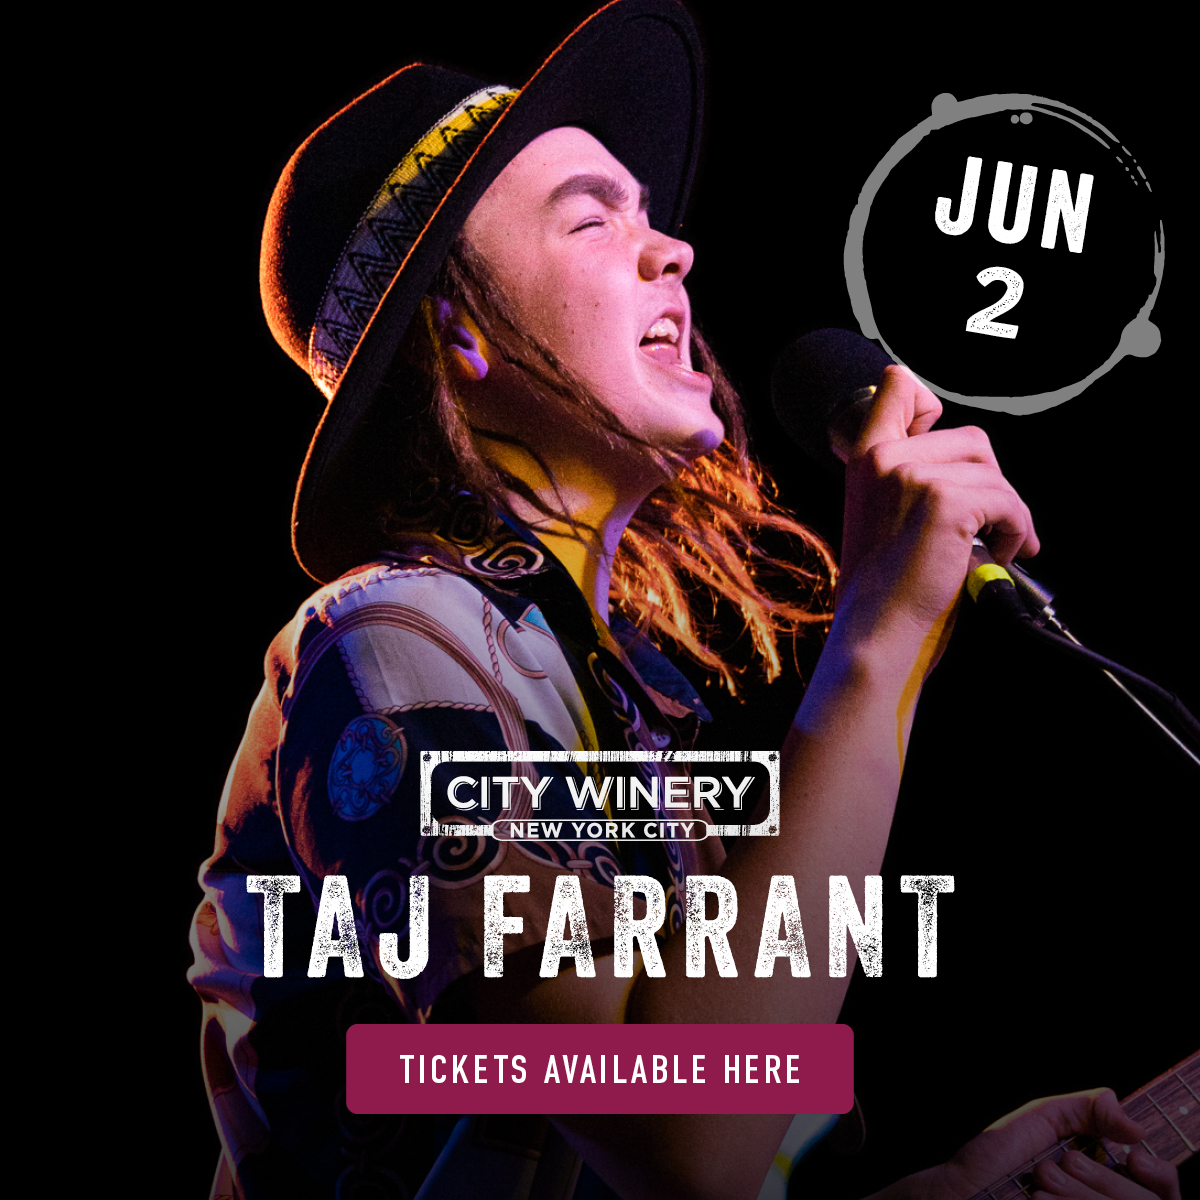 Taj Farrant, with special guests Jazel Farrant and Nathan Bryce, will rock the stage at City Winery on June 2. Don't miss this young rocker's captivating performance. Secure your tickets for a night of unforgettable rock music! t.dostuffmedia.com/t/c/s/142673